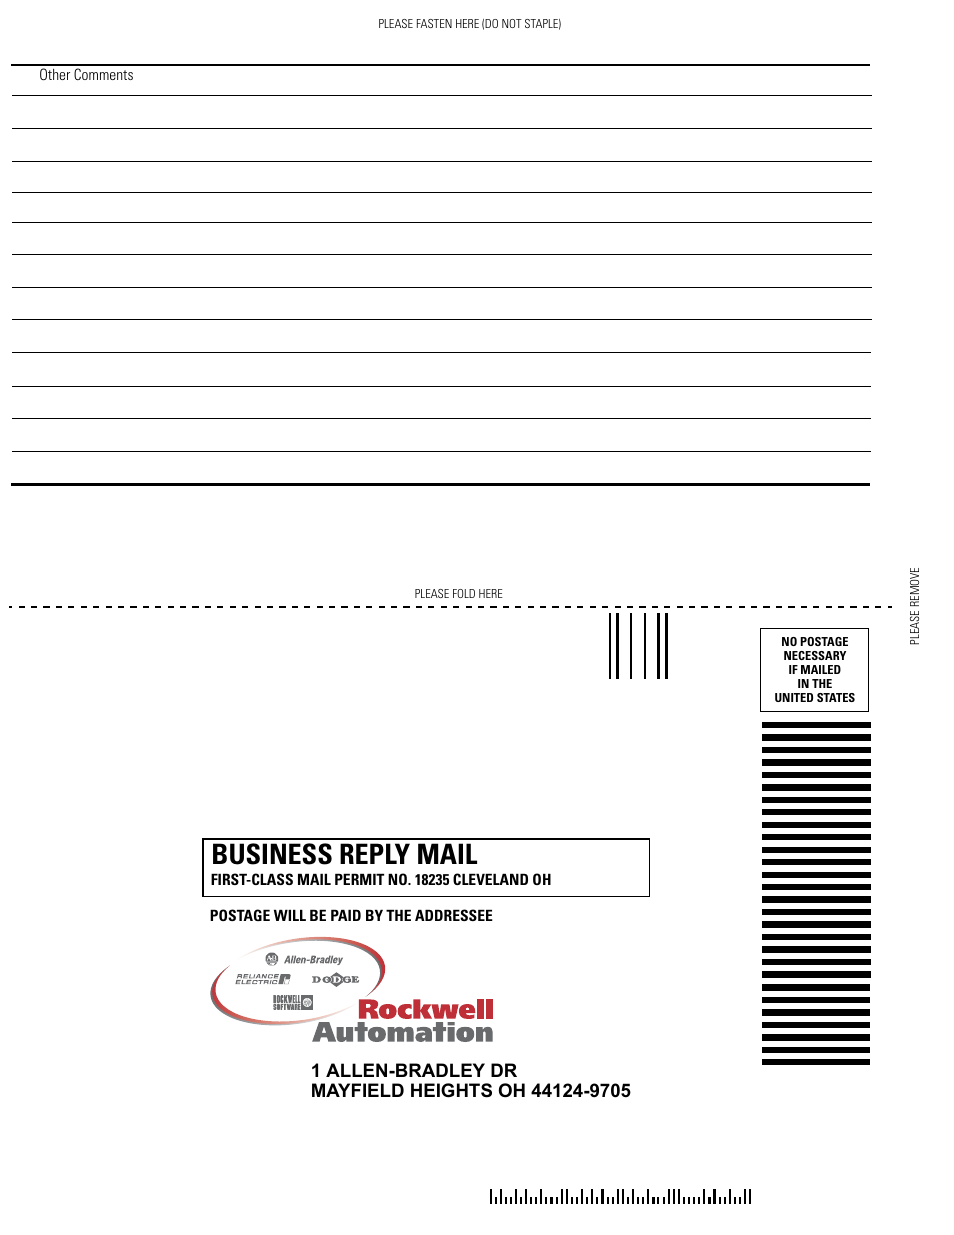 Business reply mail | Rockwell Automation 1757-SWKIT5100 ProcessLogix R510.0 Installation and Upgrade Guide User Manual | Page 268 / 271